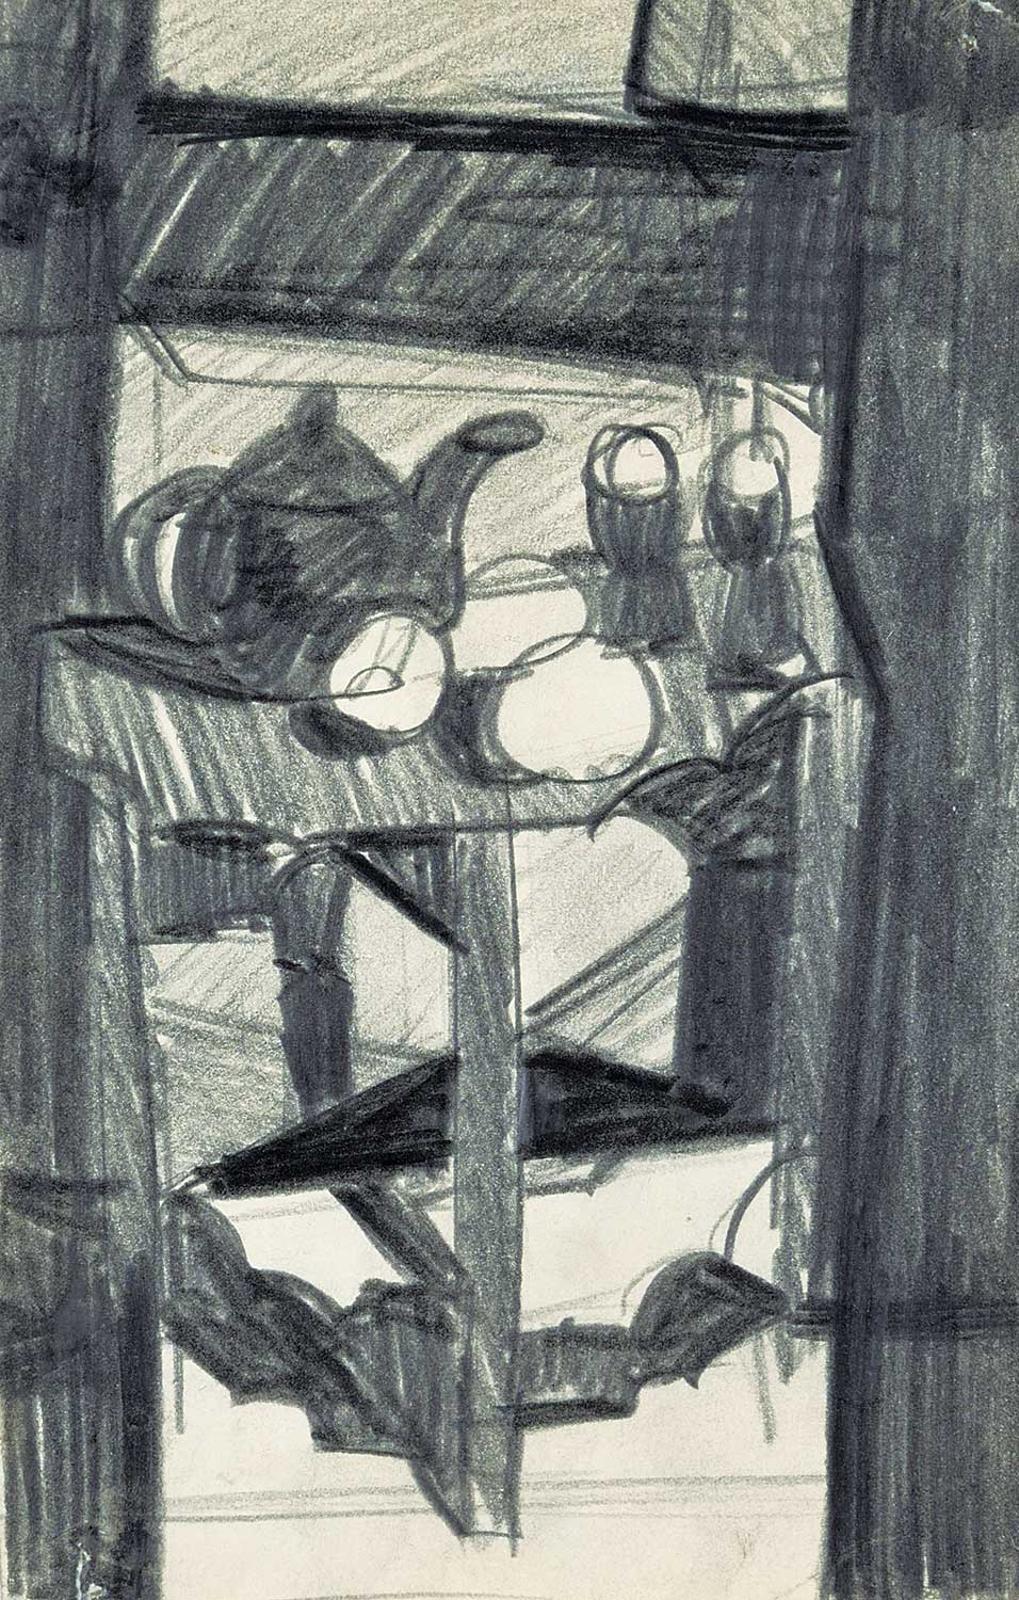 David Pugh (1946-1994) - Untitled - Kettle on the Chair